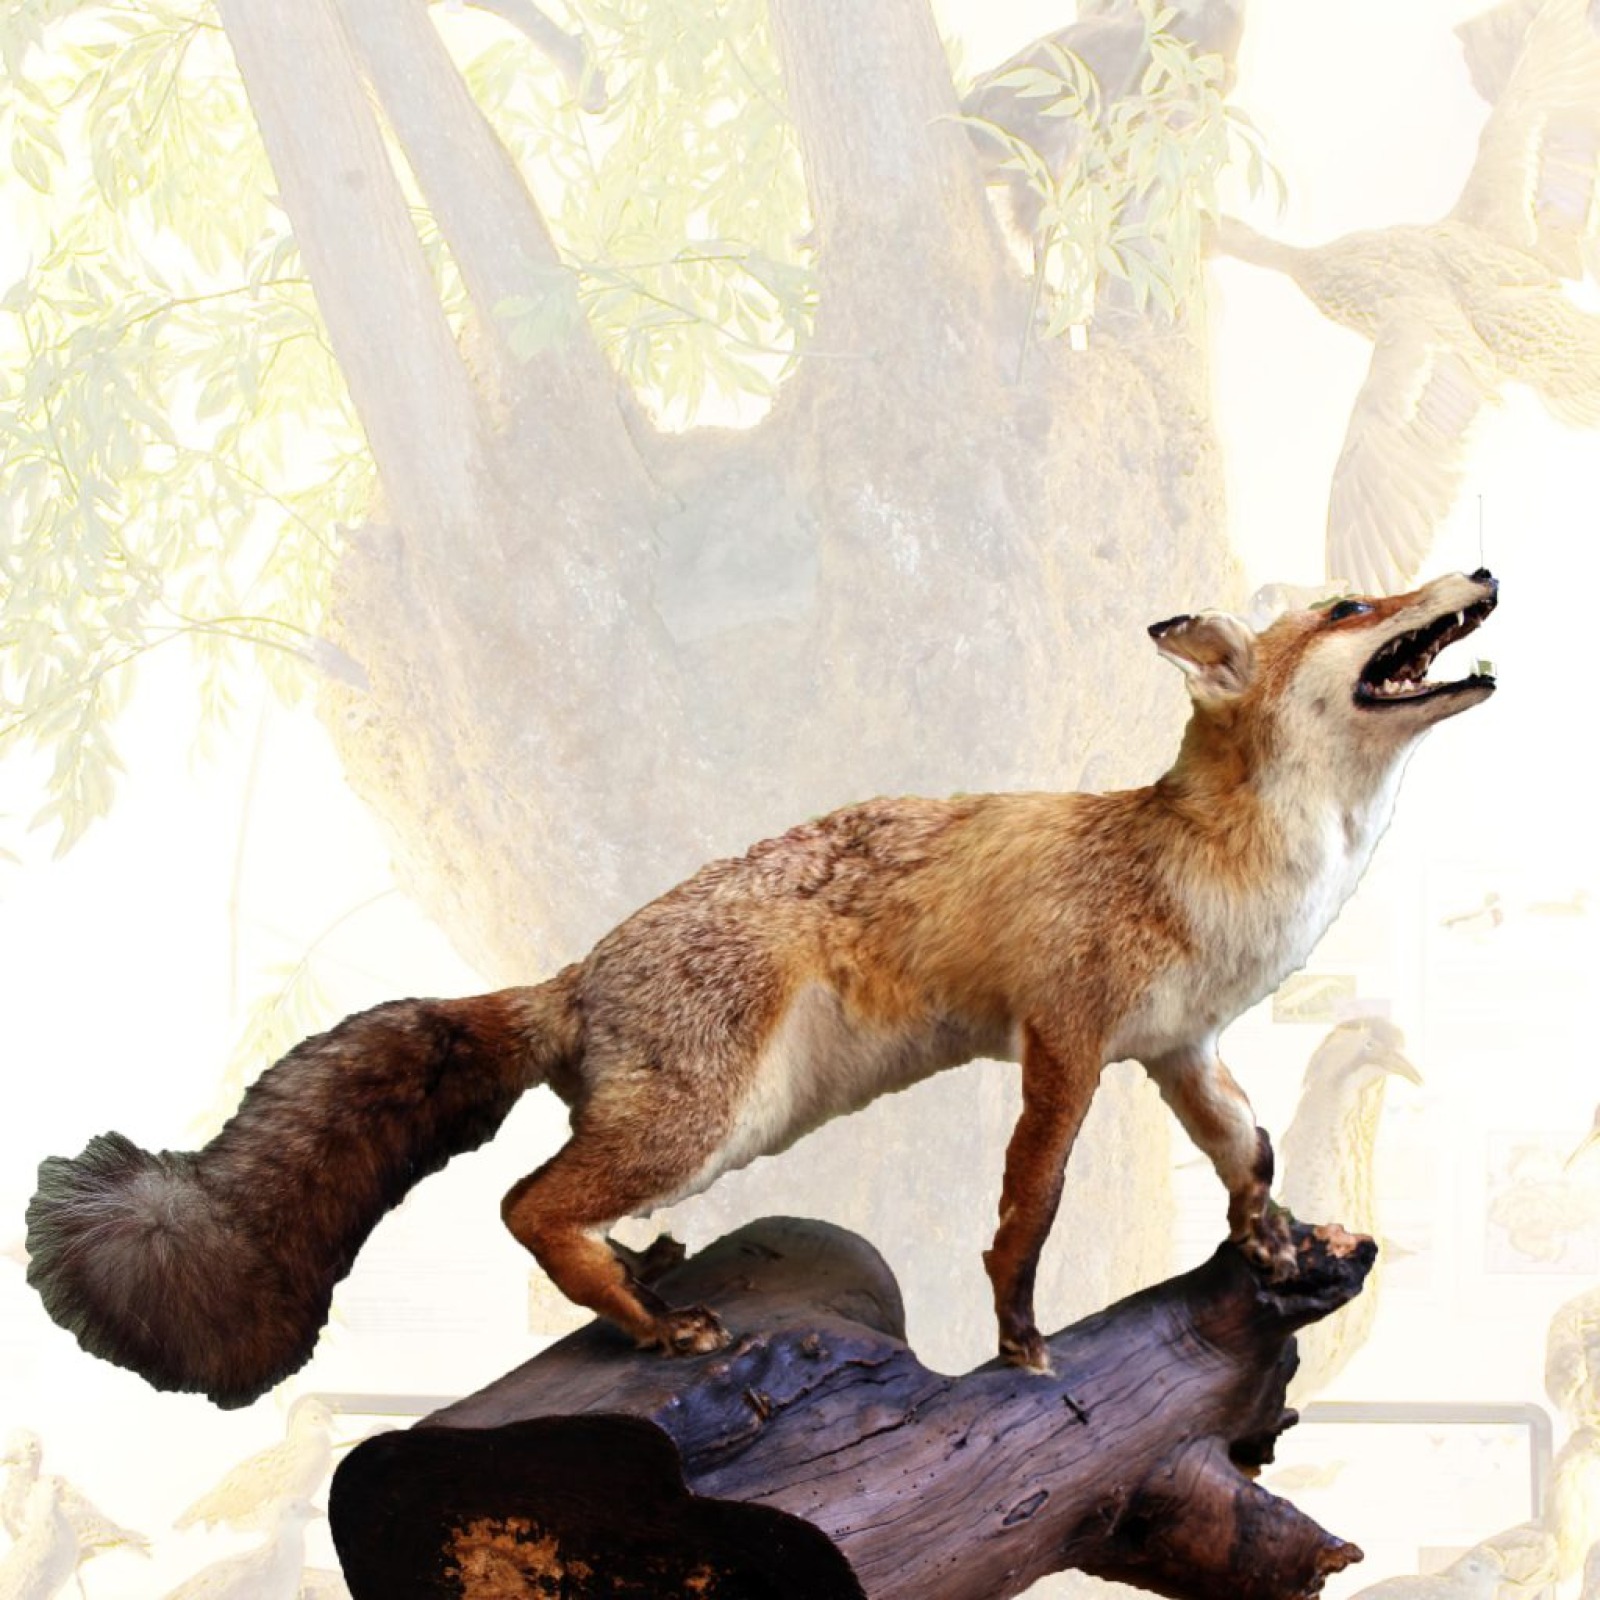 Stuffed fox, his mouth open, placed on a tree trunk